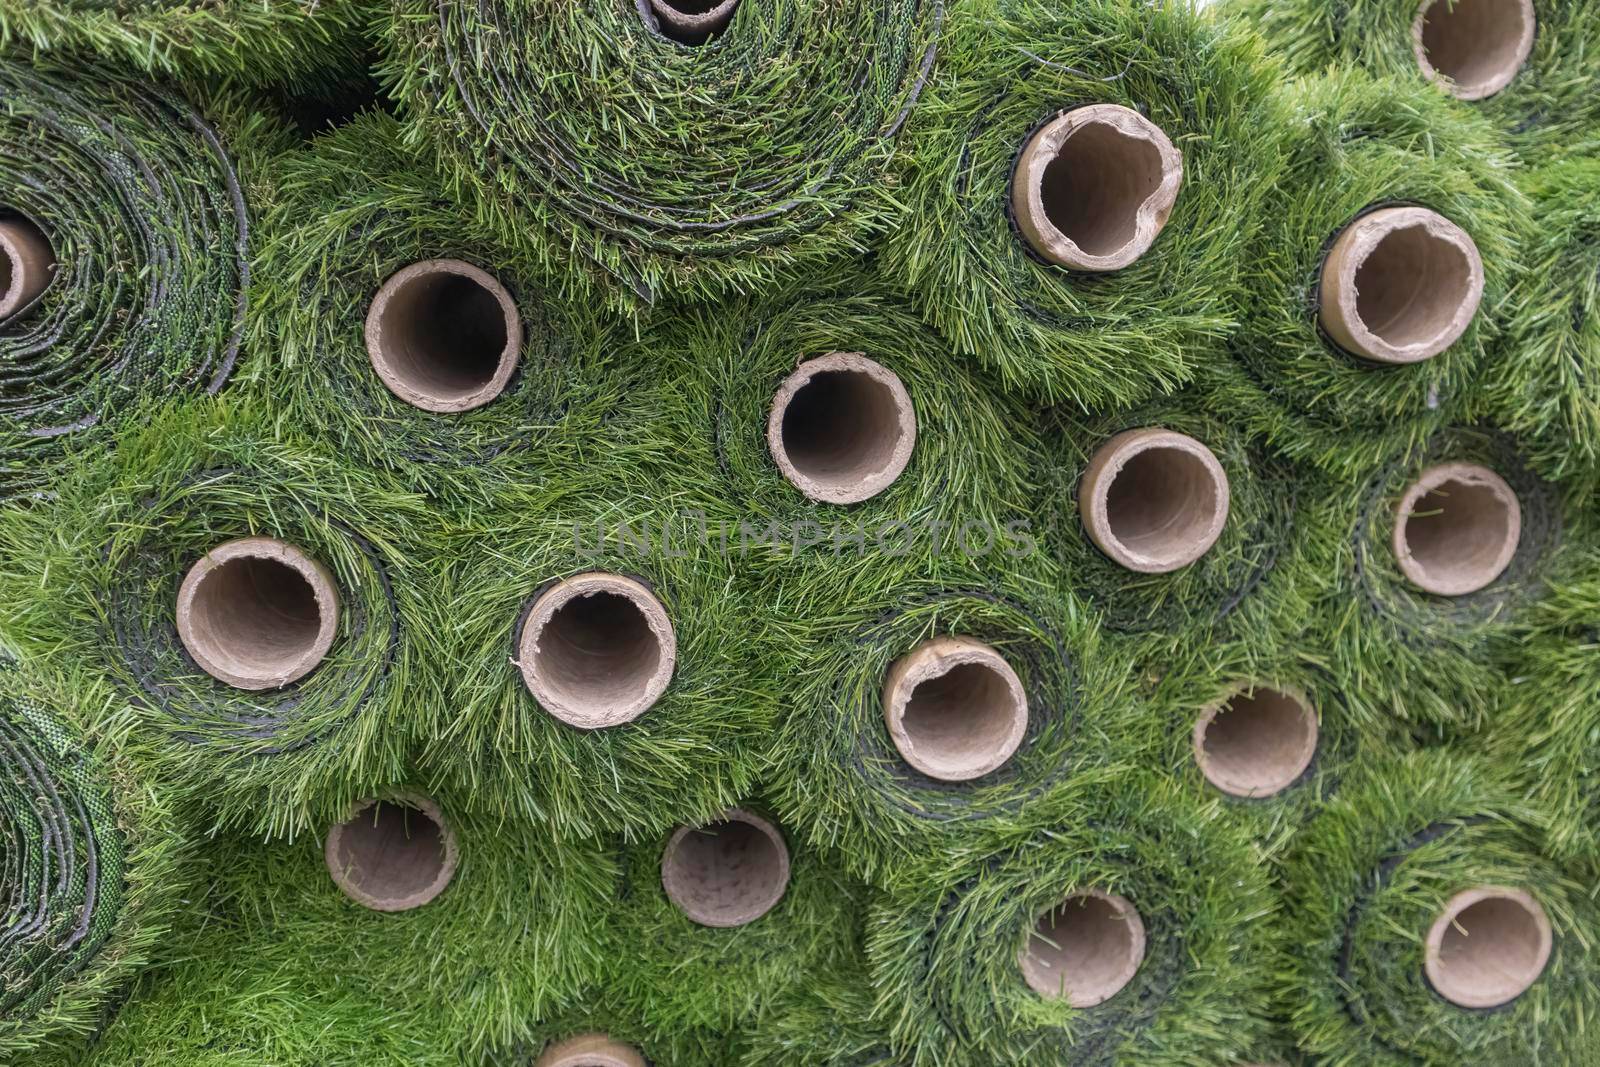 artificial grass in rolls lawn close-up as a background. High quality photo